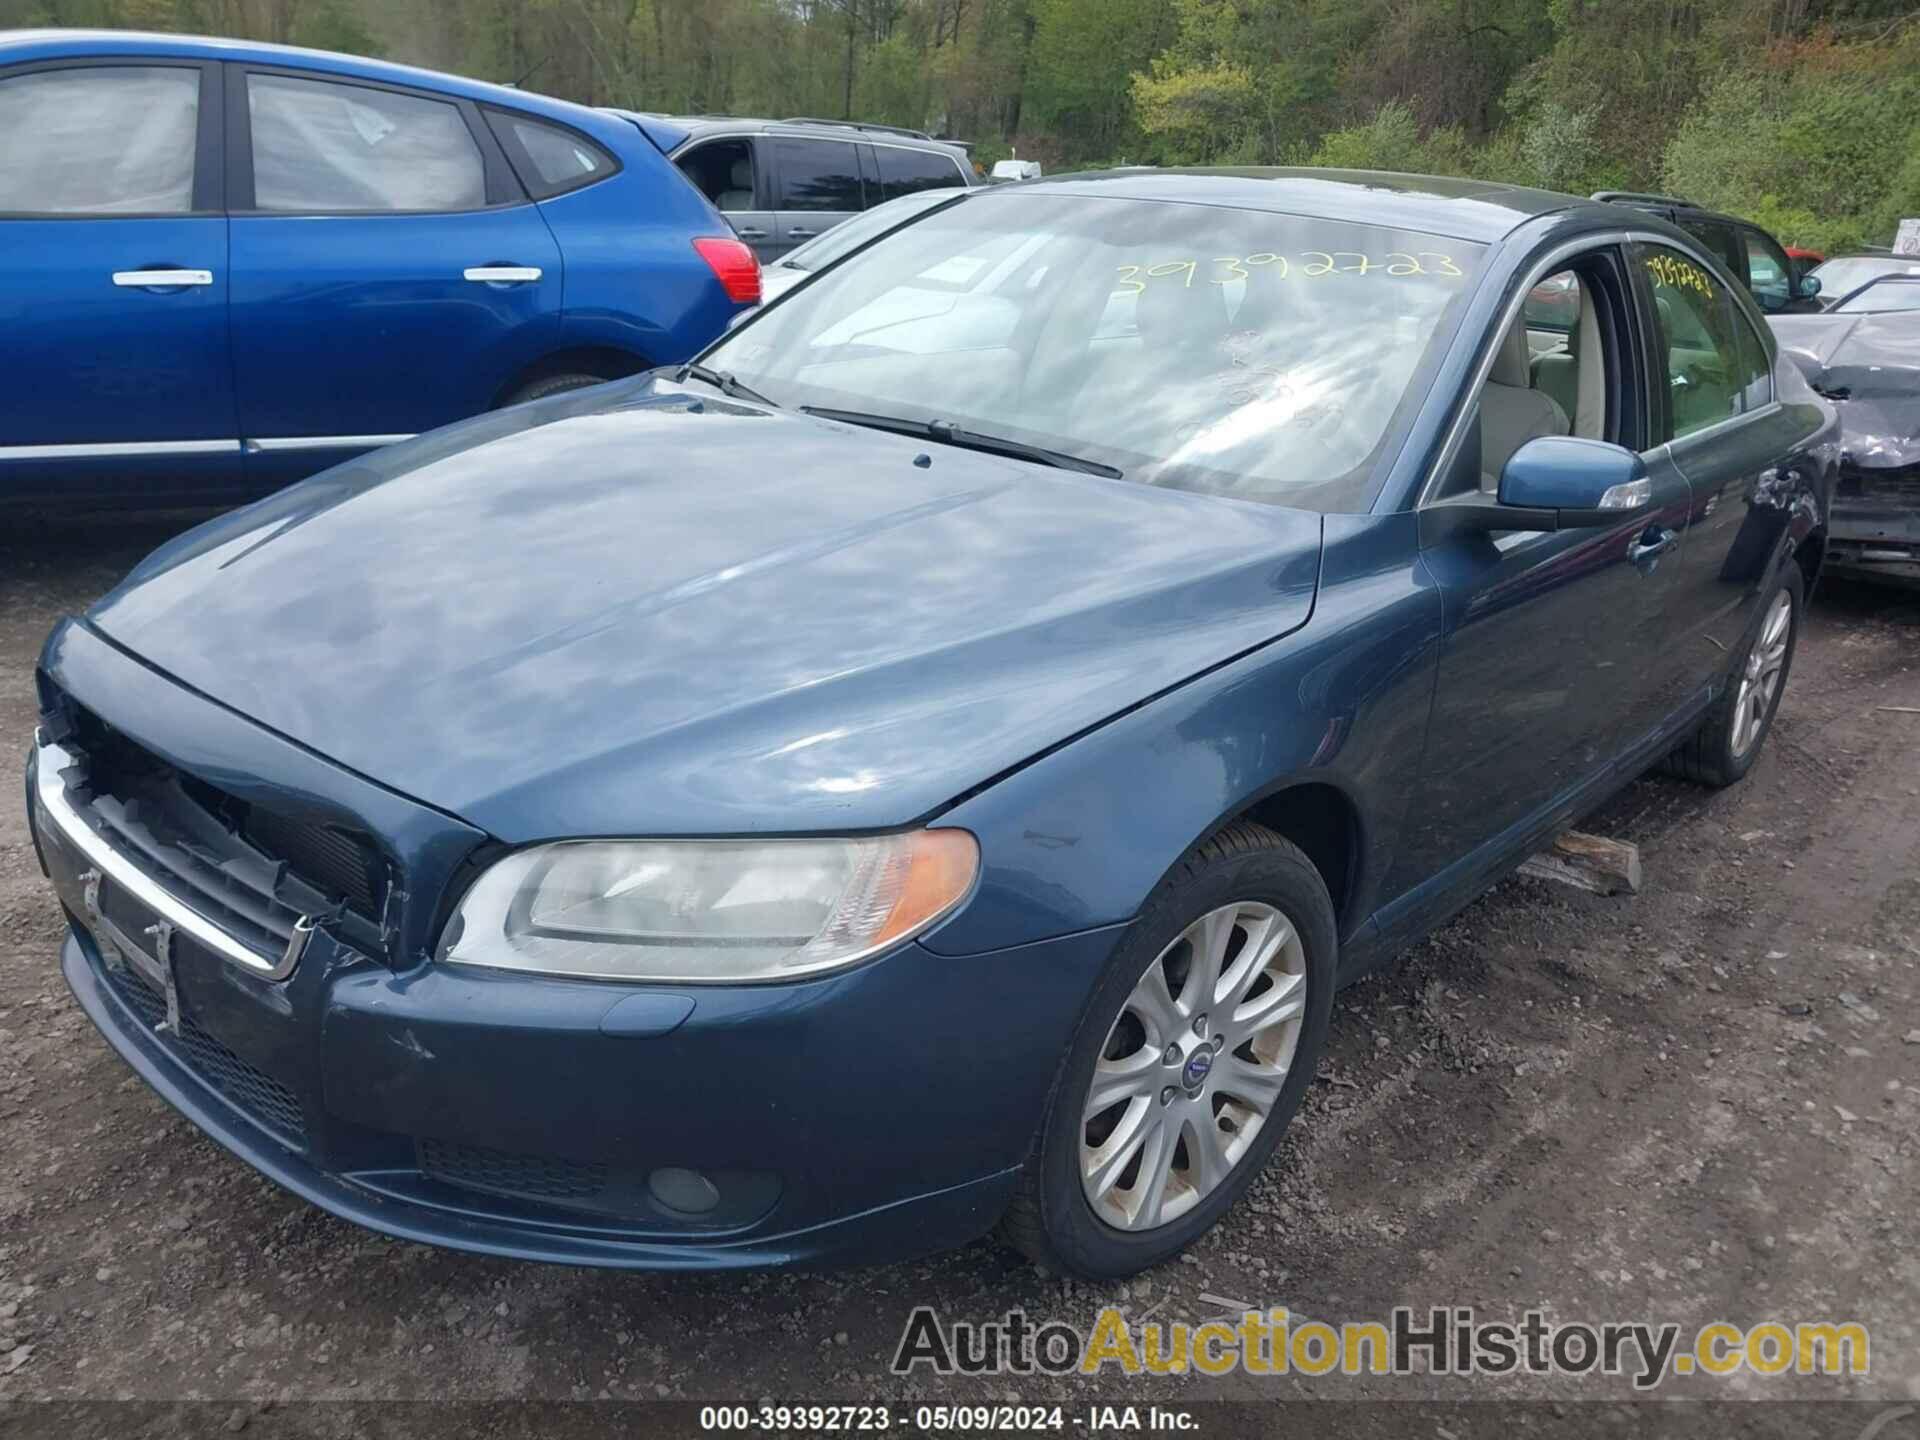 VOLVO S80 3.2, YV1AS982791106374